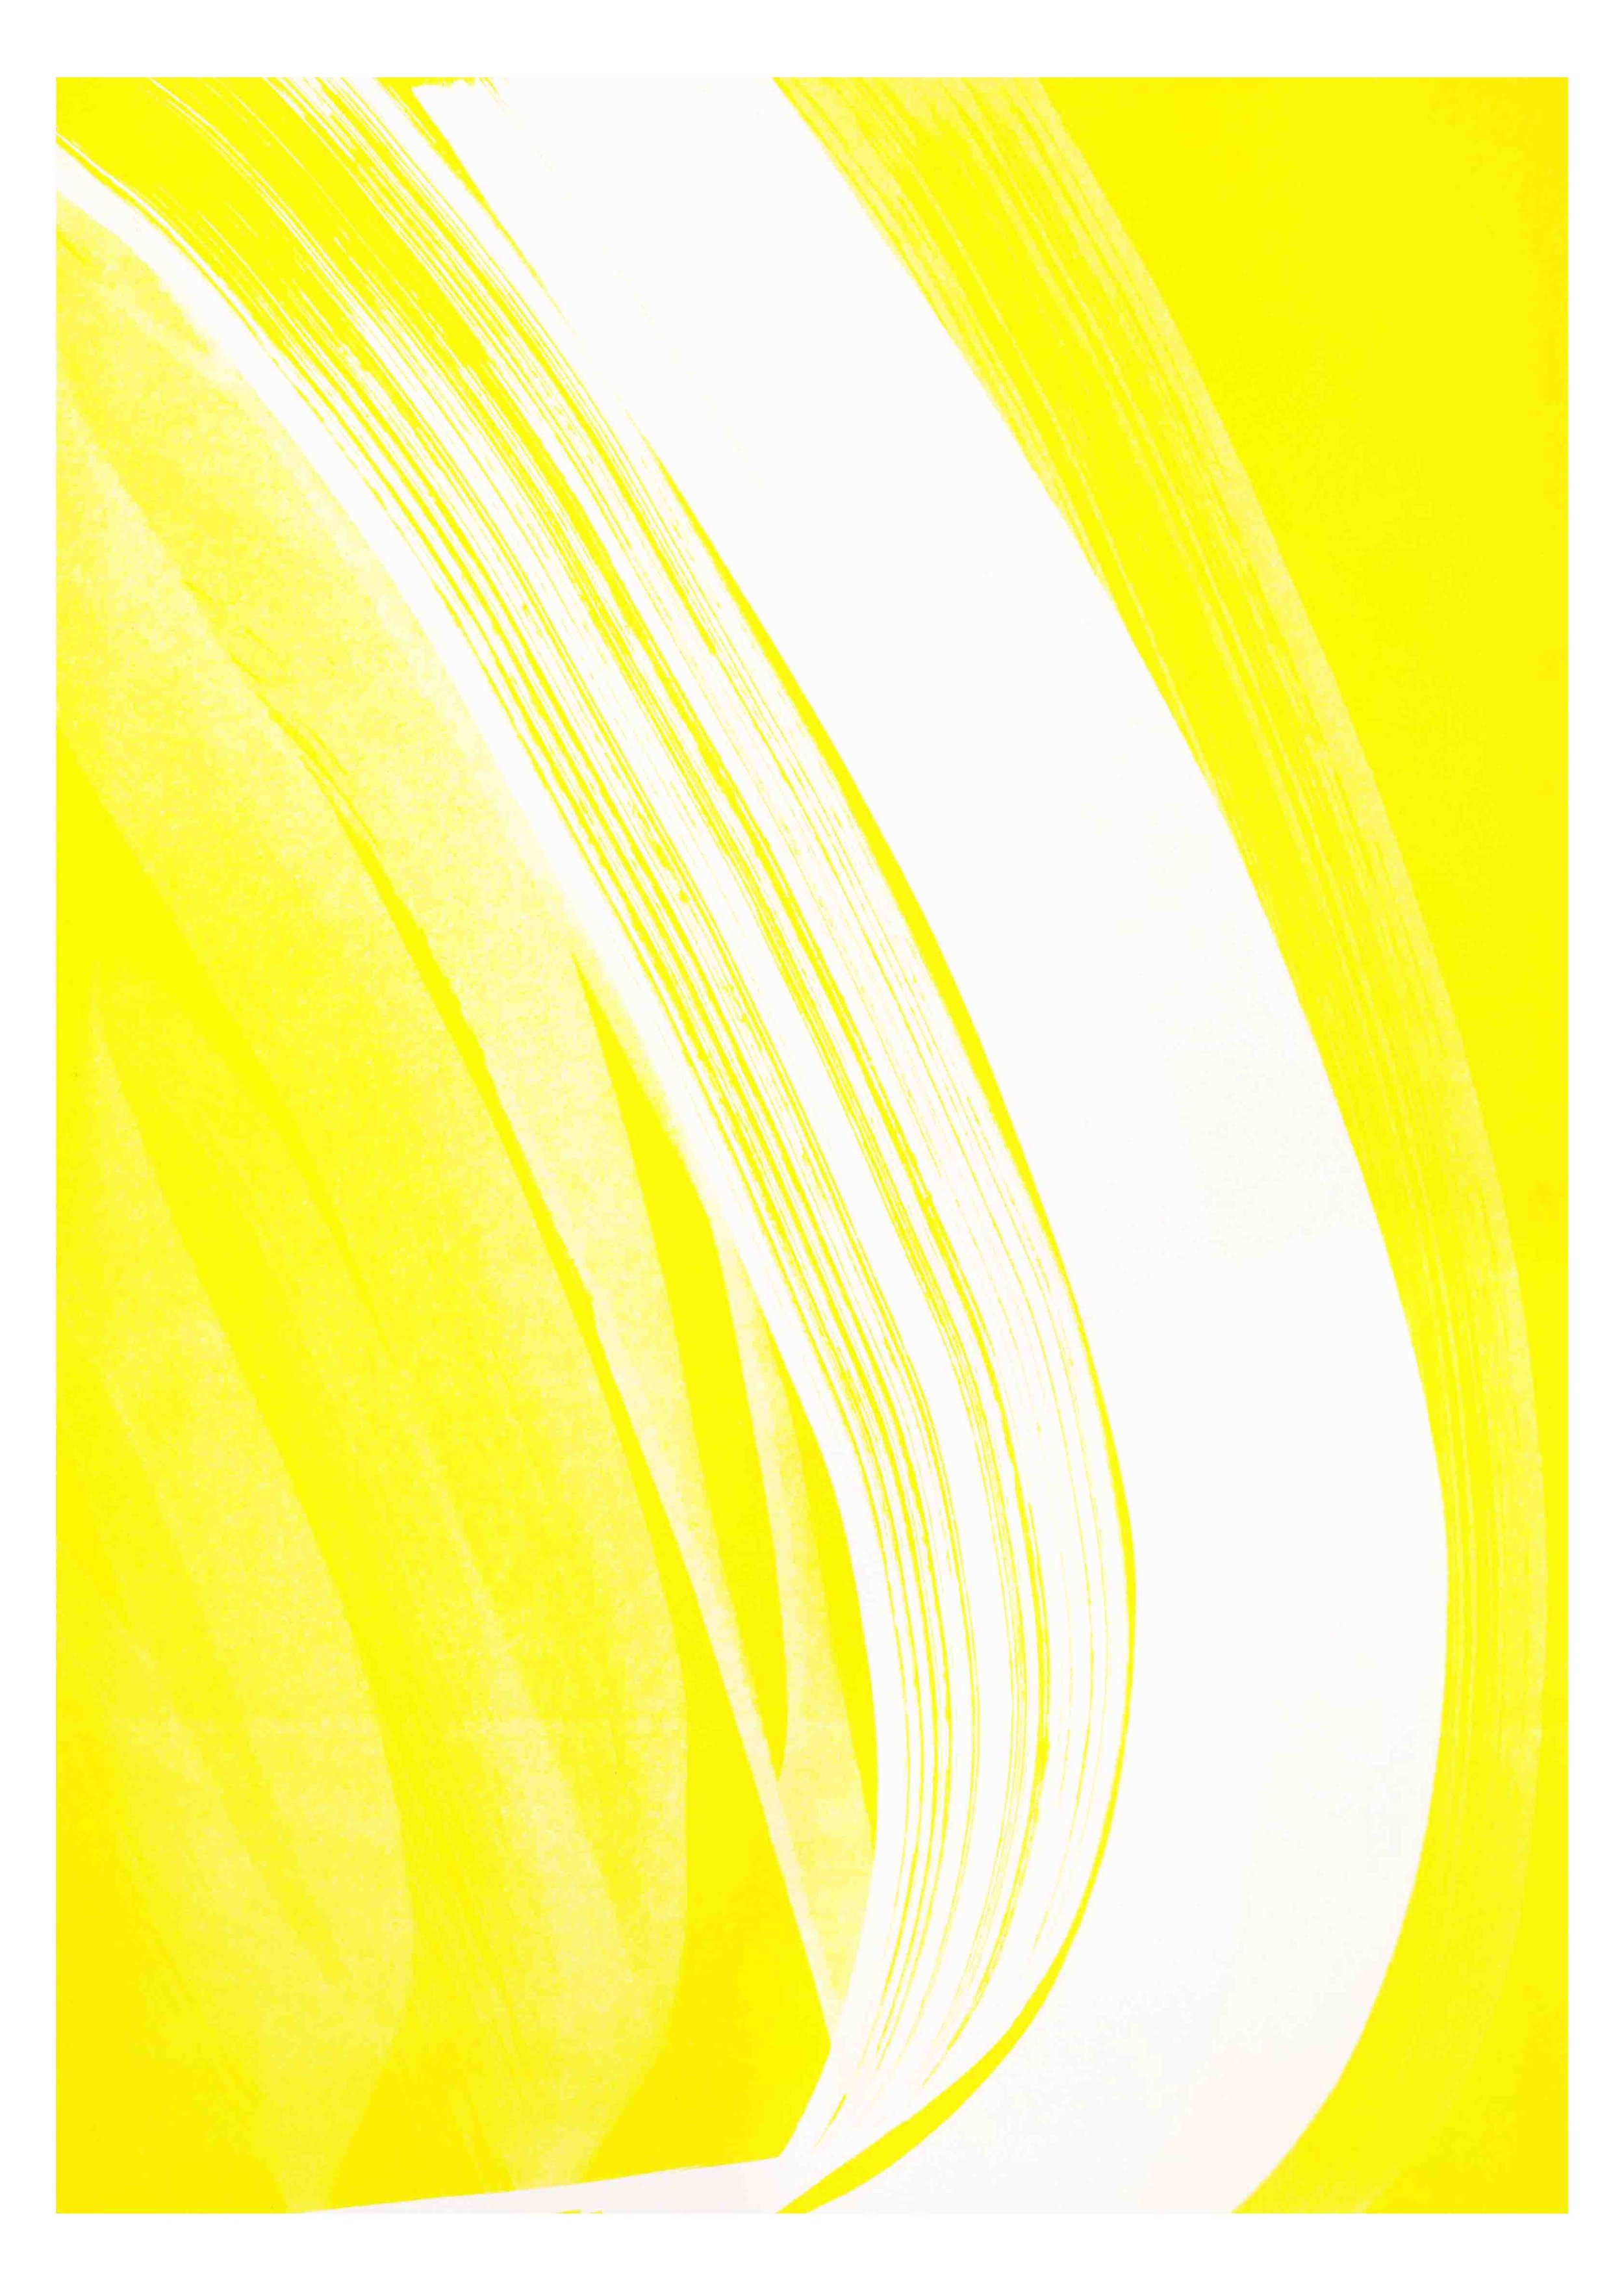  Untitled, 2023 risograph print on paper 42,0 x 29,7 cm (1-23) 